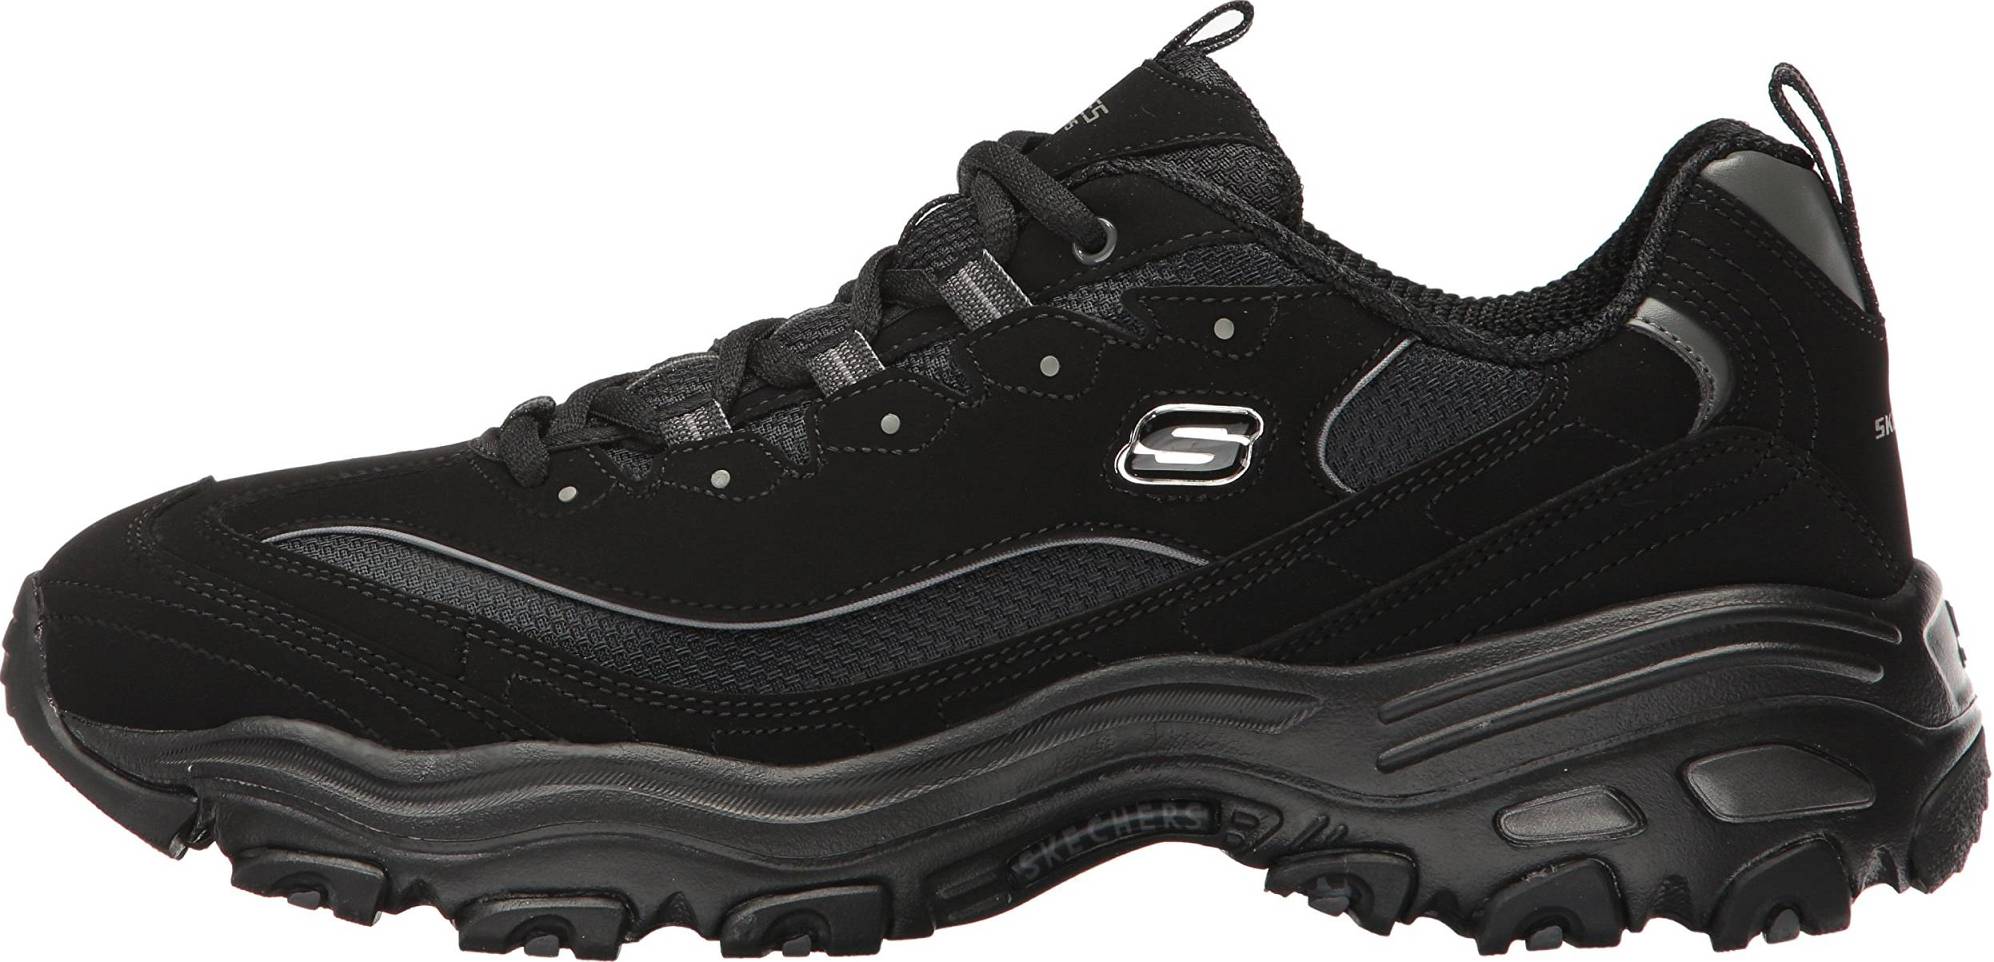 Skechers D'Lites – Shoes Reviews & Reasons To Buy